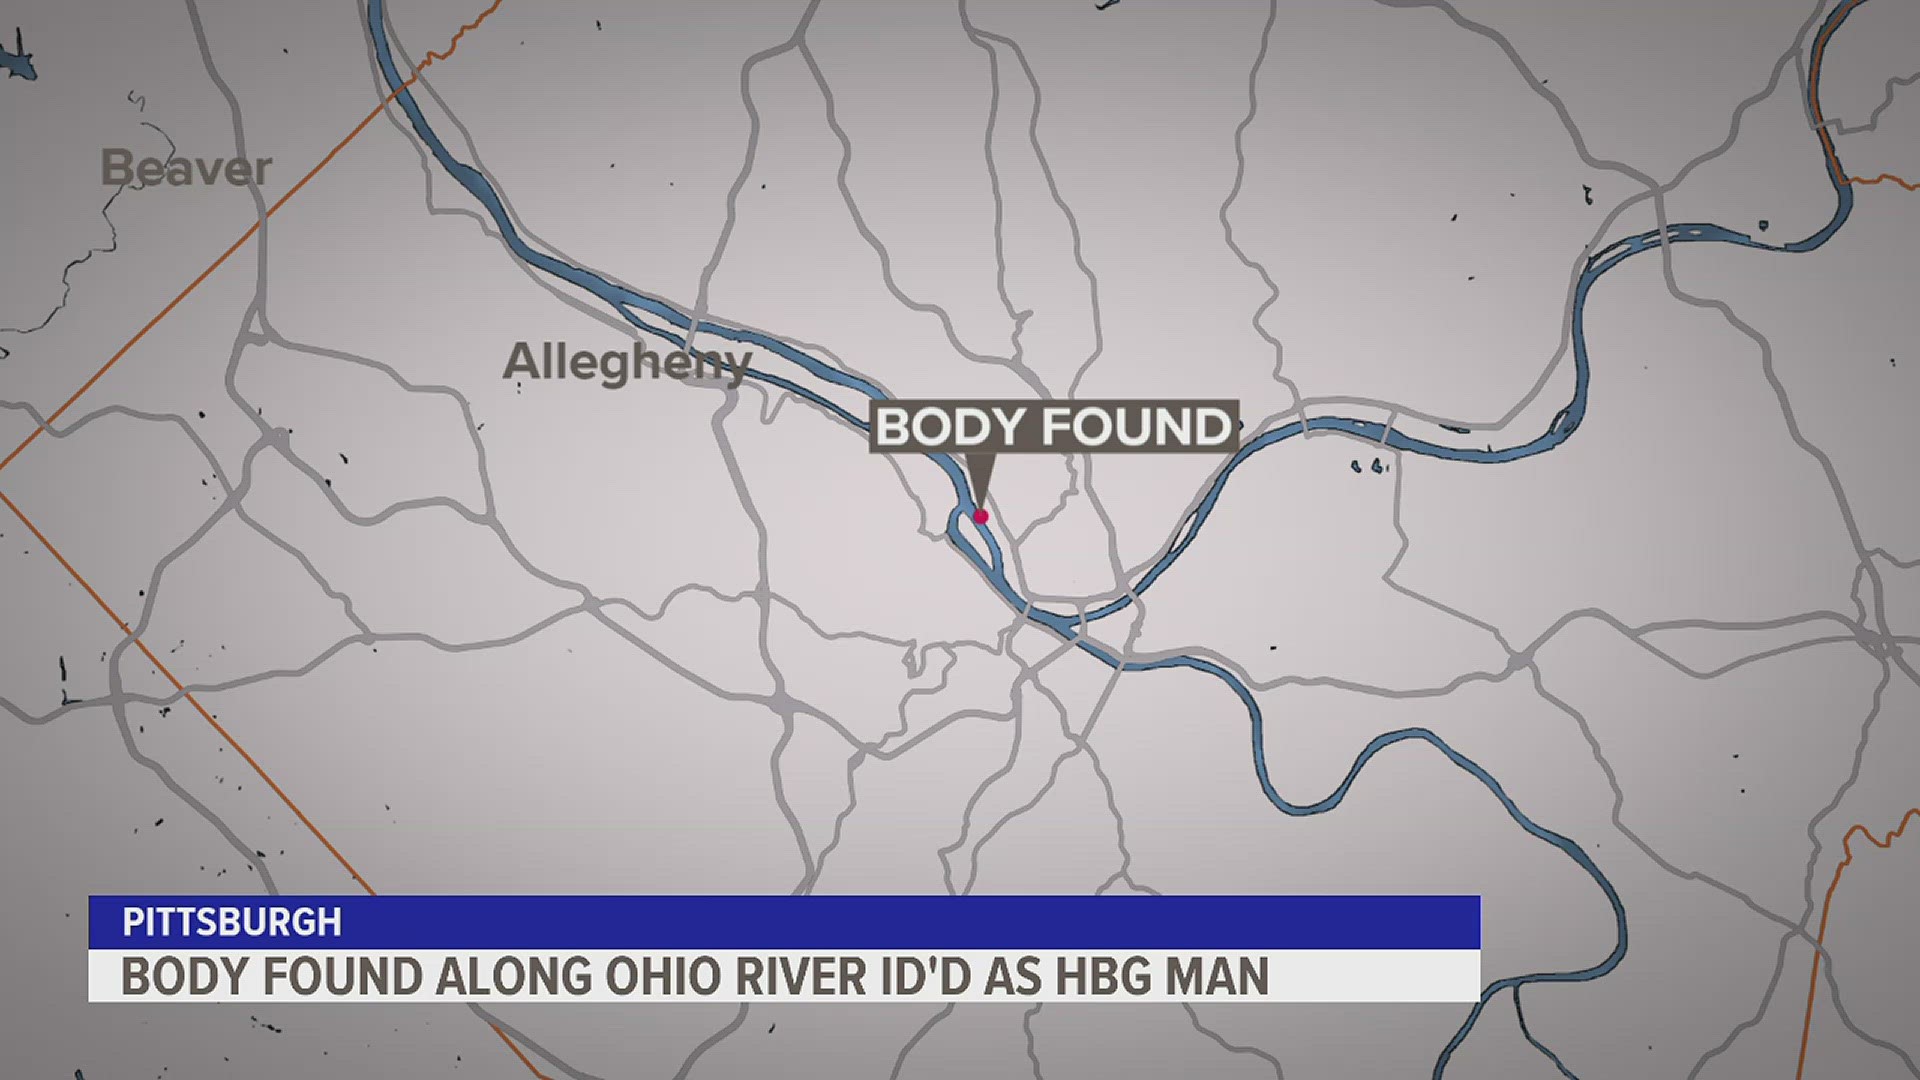 Dean A. Barnes, 37, from Harrisburg was identified as the body found along the riverbank in April of 2022.